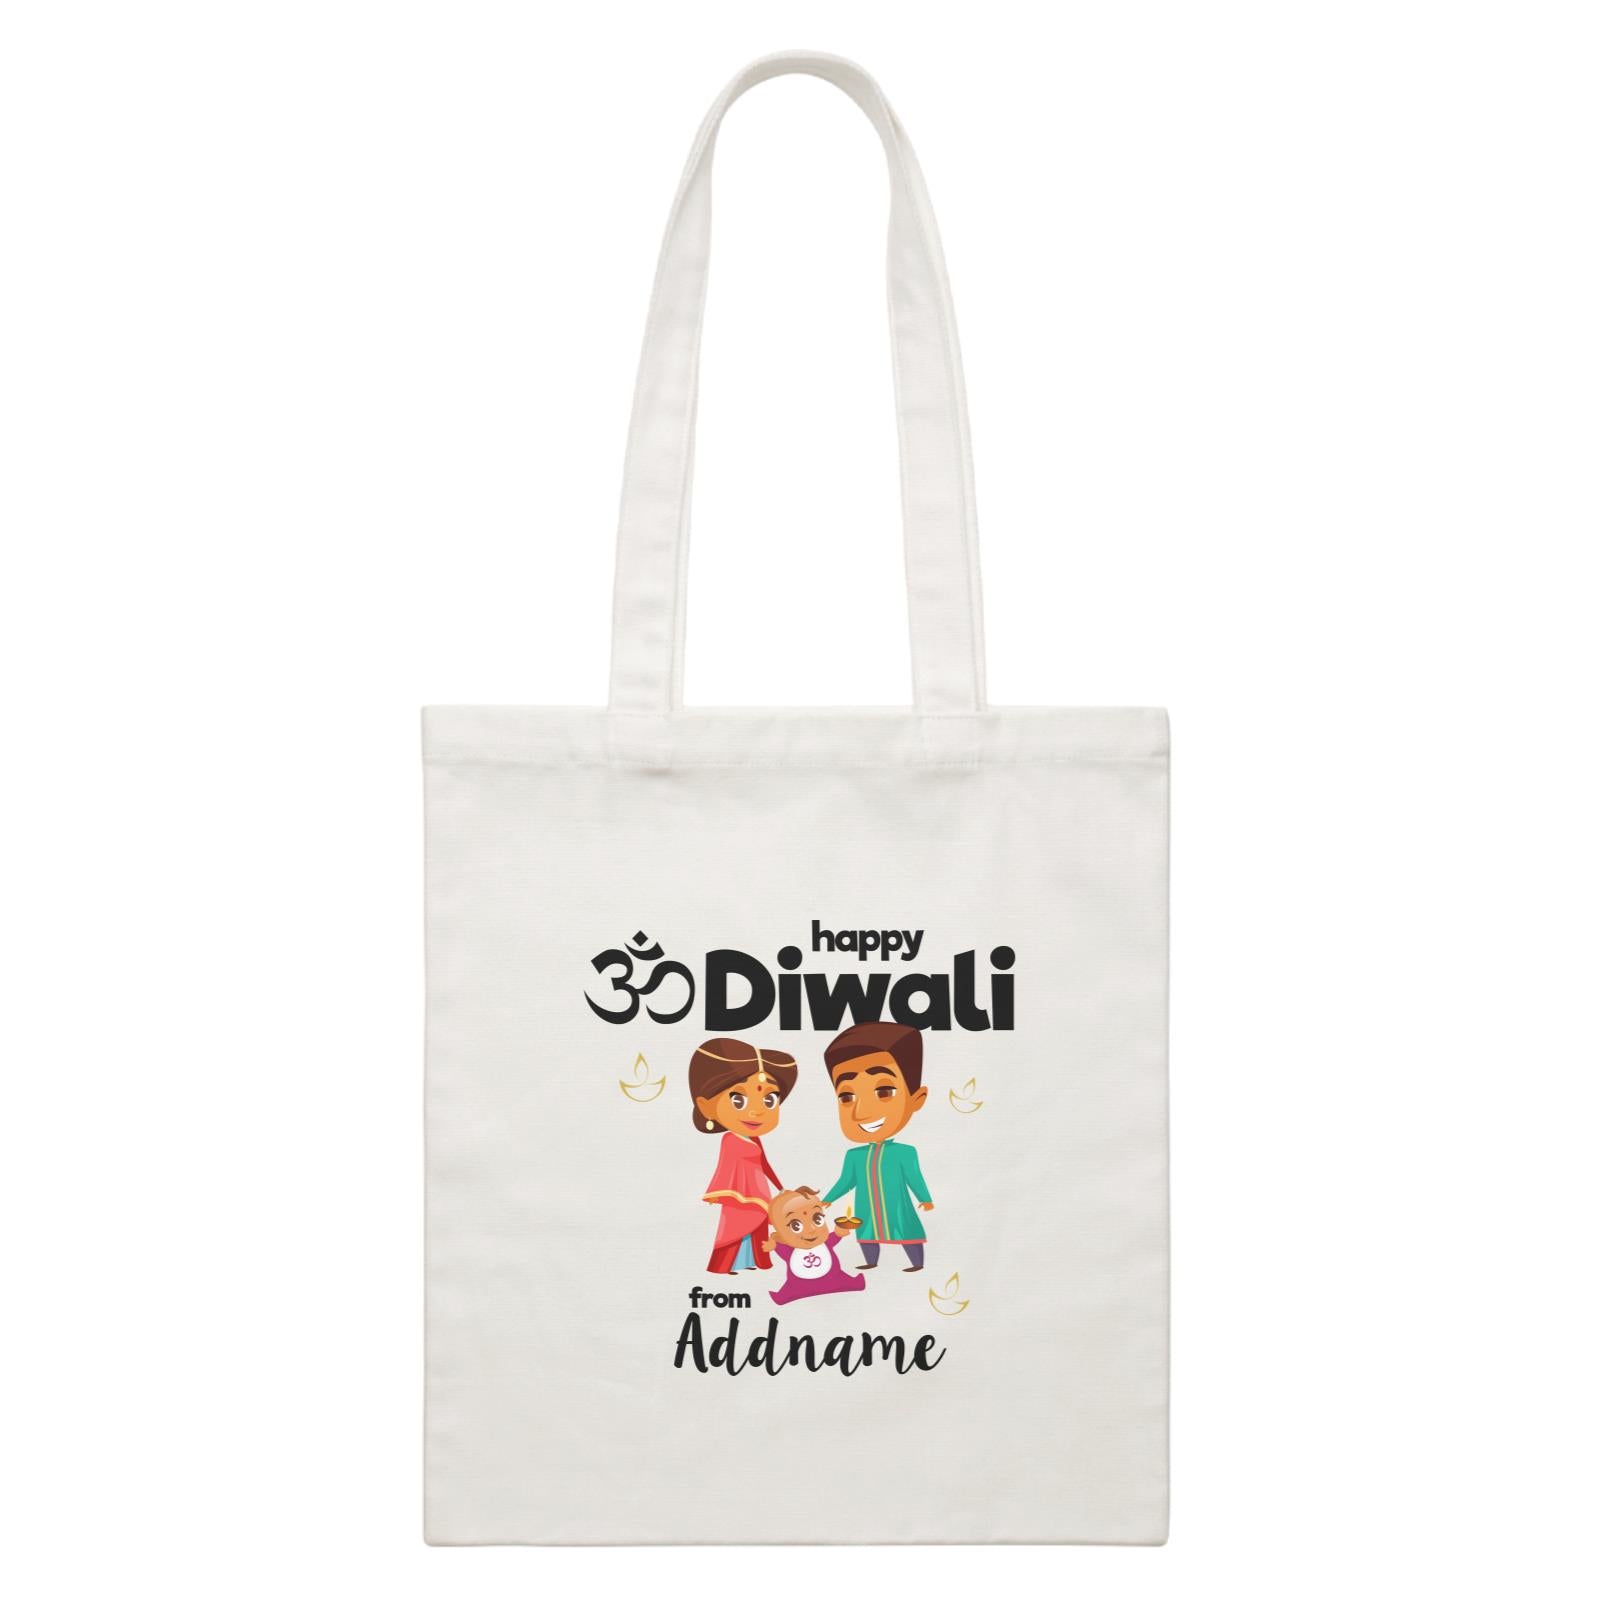 Cute Family Of Three OM Happy Diwali From Addname White Canvas Bag